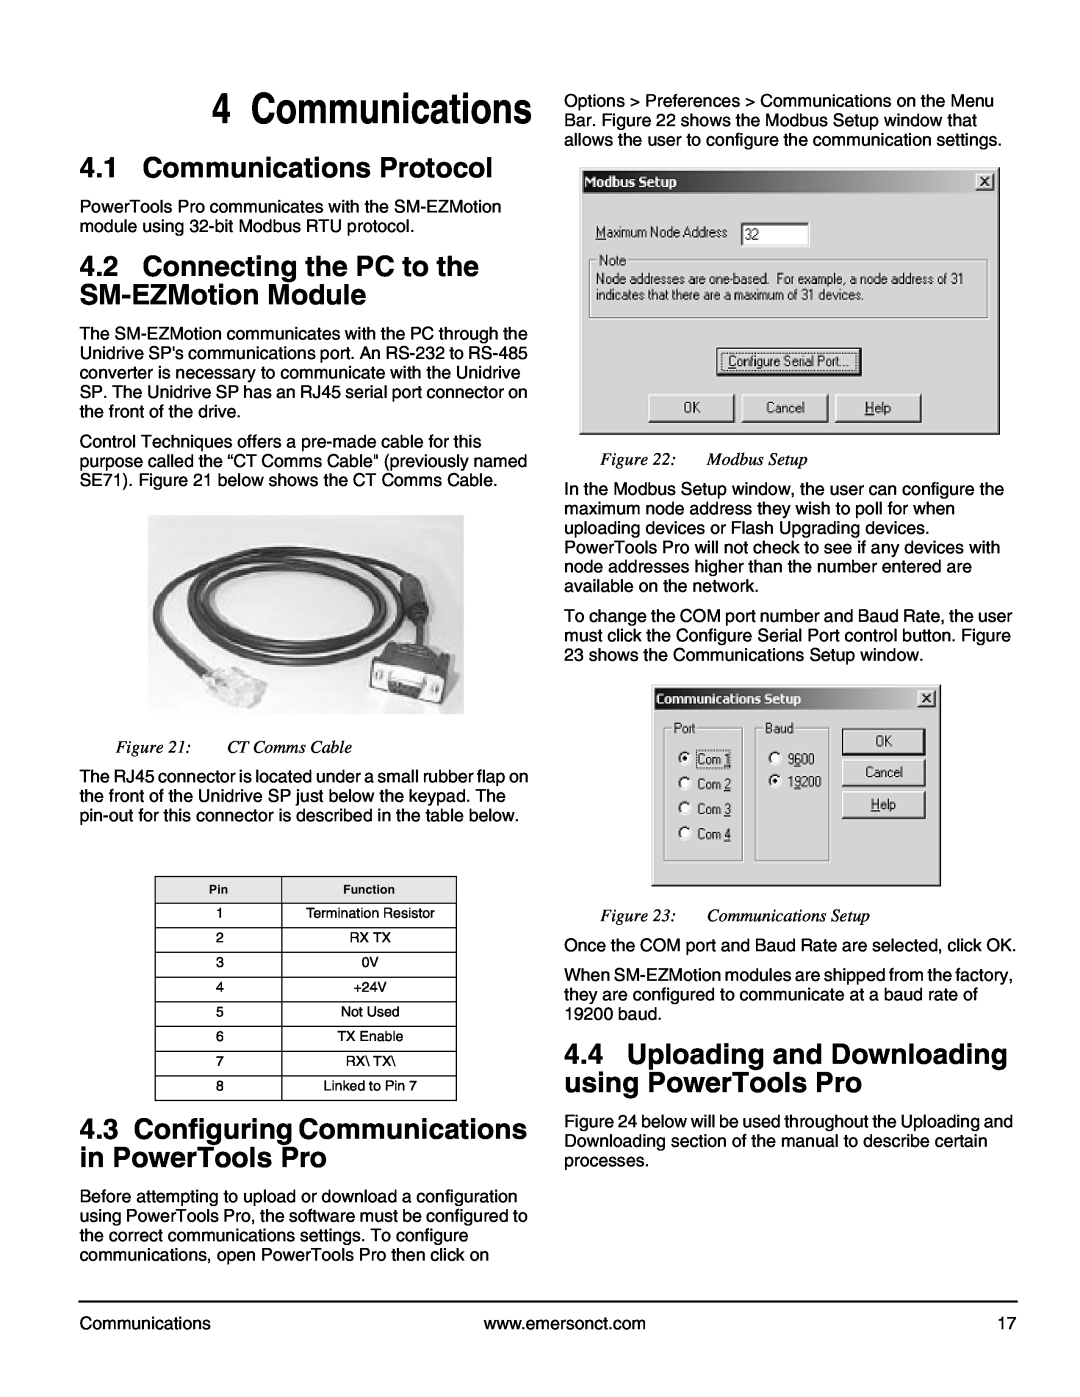 Emerson P/N 400361-00 manual Communications Protocol, Connecting the PC to the SM-EZMotion Module, CT Comms Cable 